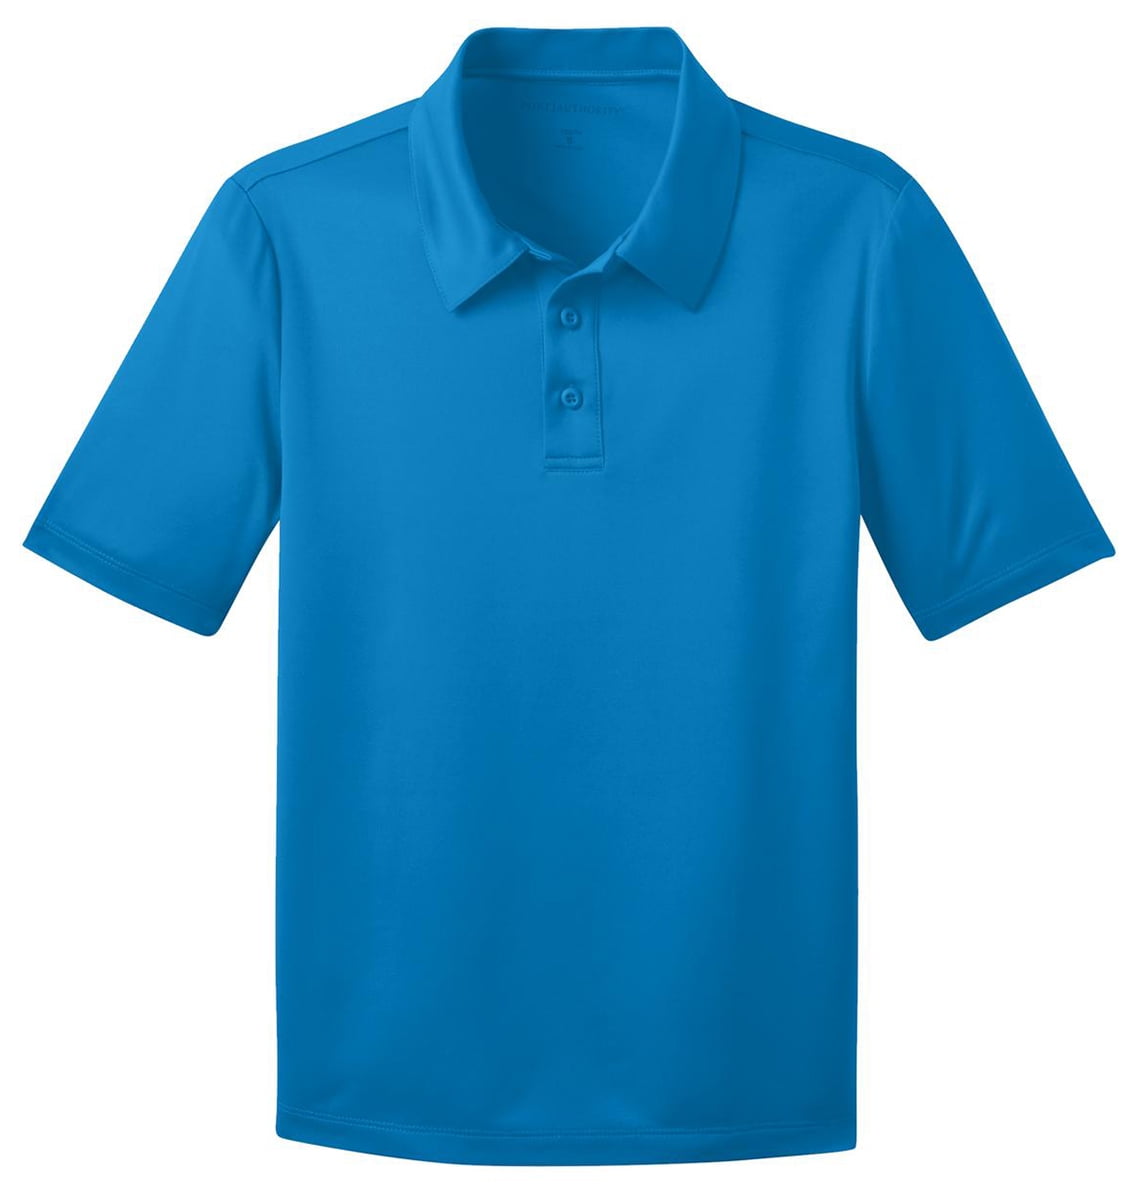 Port Authority Youth Silk Touch Performance Polo Shirt - Walmart.com